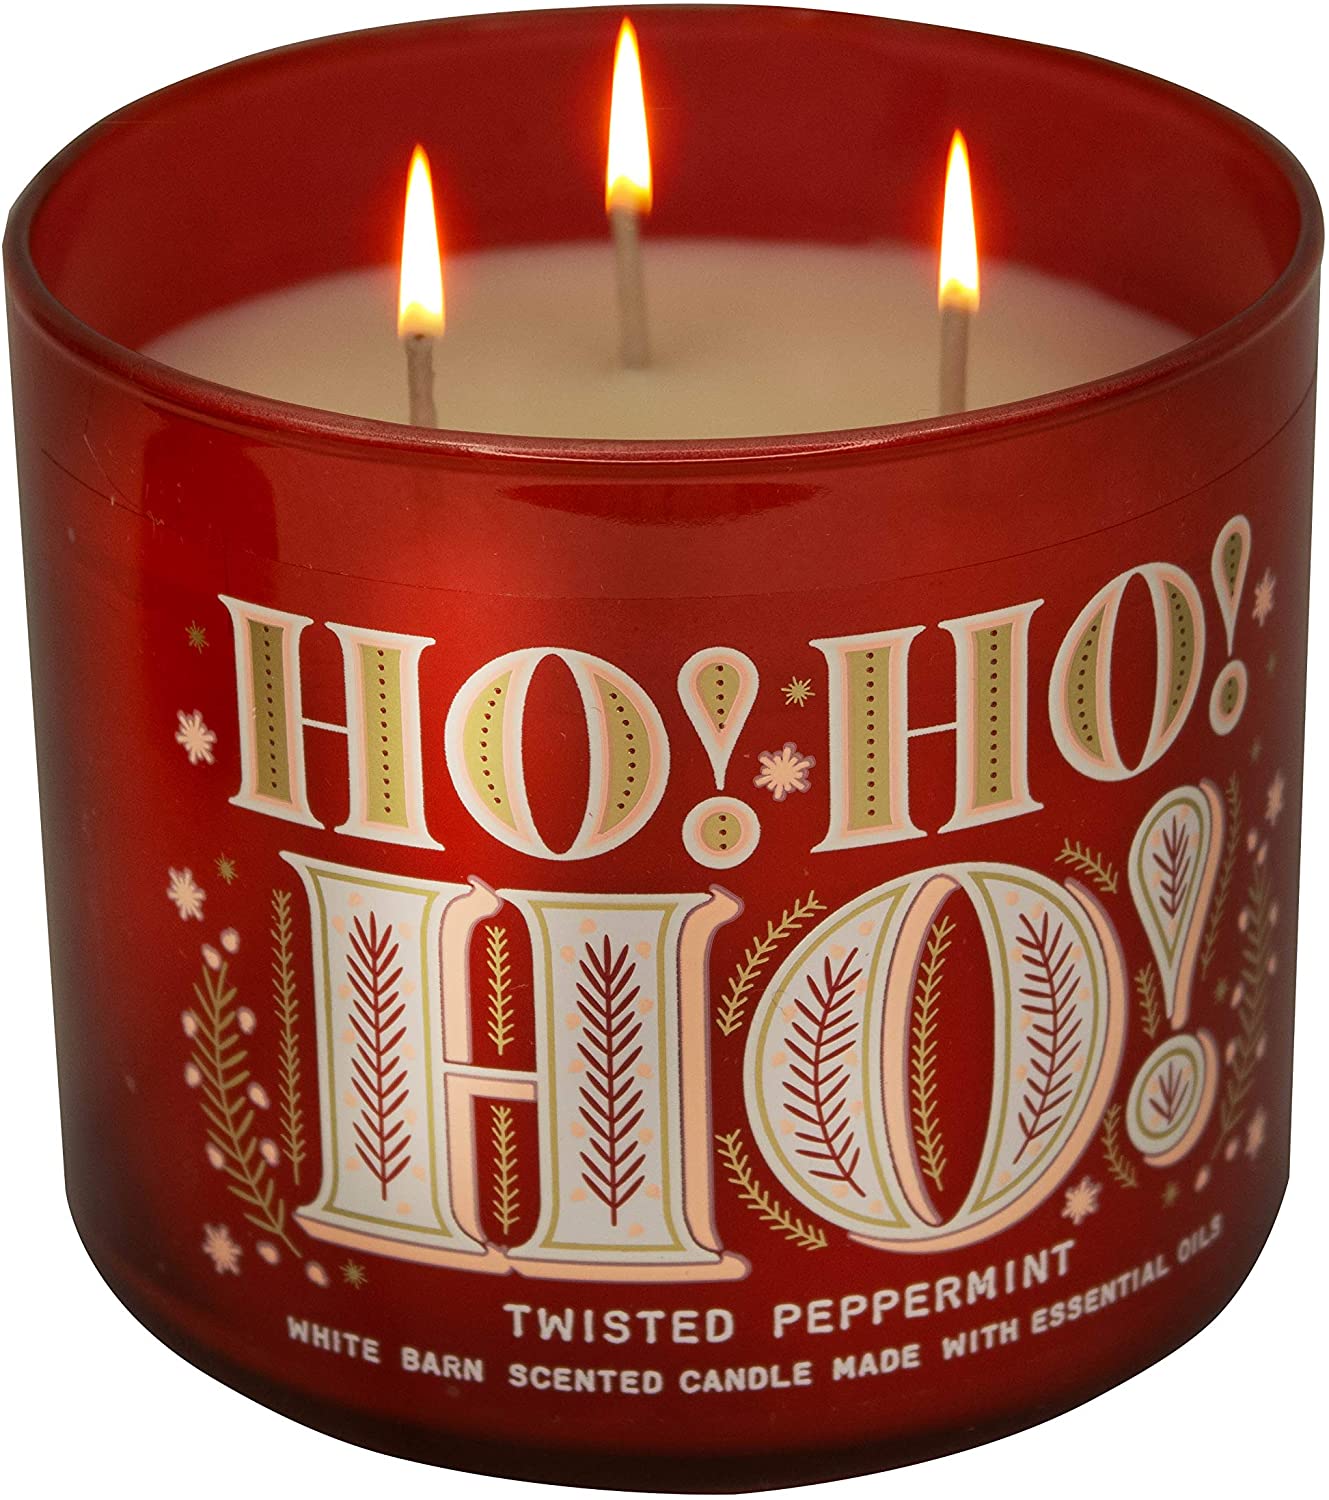 White Barn 3-Wick Candle w/Essential Oils - 14.5 oz - 2020 Holidays Scents! (Twisted Peppermint) - image 1 of 7